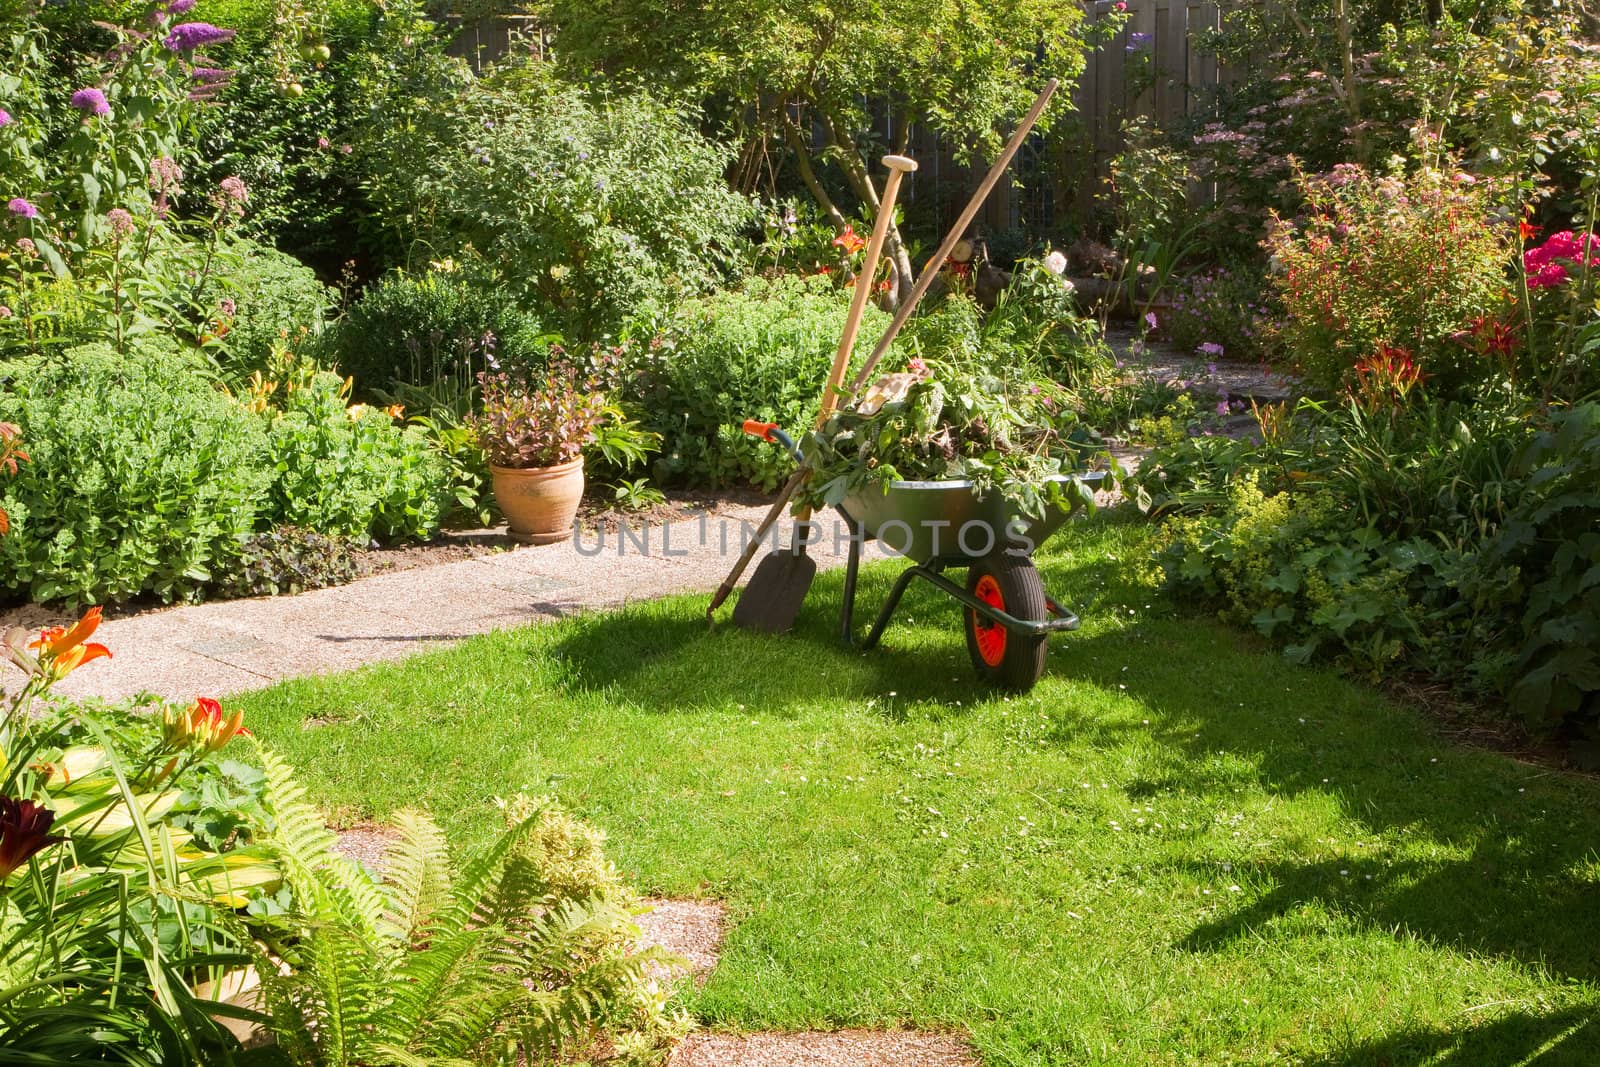 Working with wheelbarrow  in the garden  by Colette